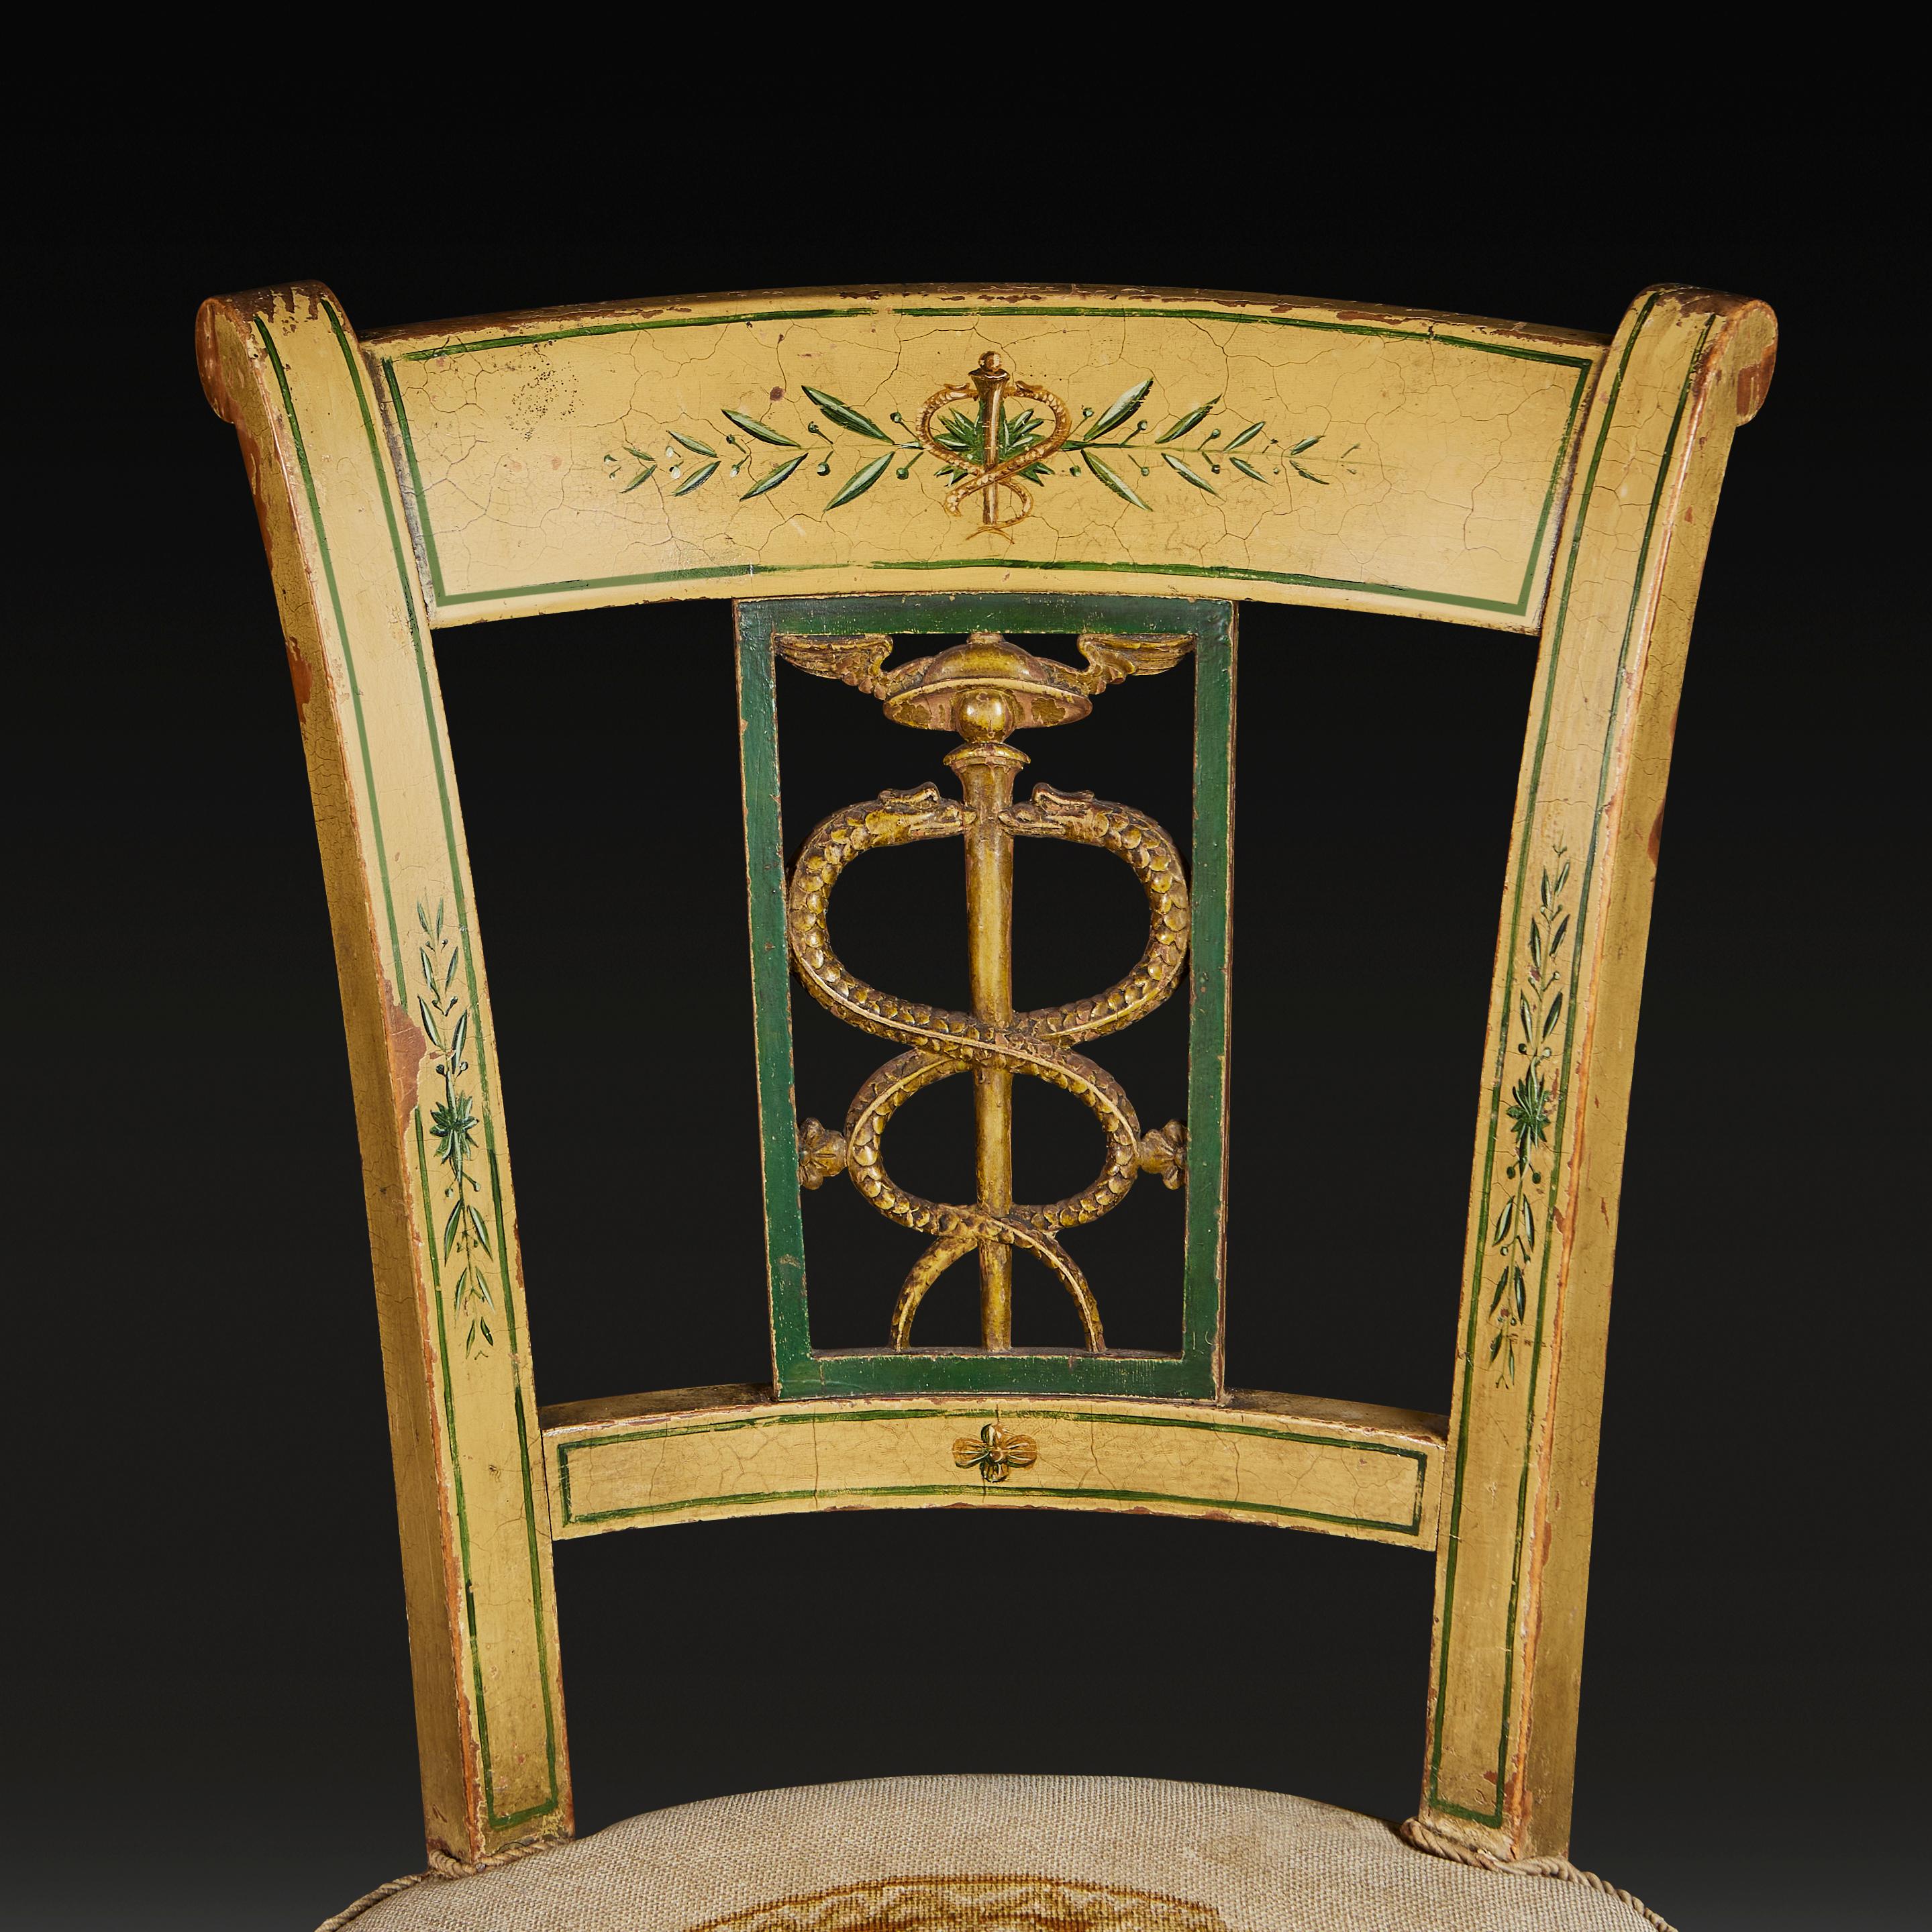 A set of four early nineteenth century North Italian chairs, the surfaces with pale yellow and green paintwork throughout, with carved and pierced serpentine back splats, with needlework seats.

Height    88.00cm

Width      59.00cm

Depth    